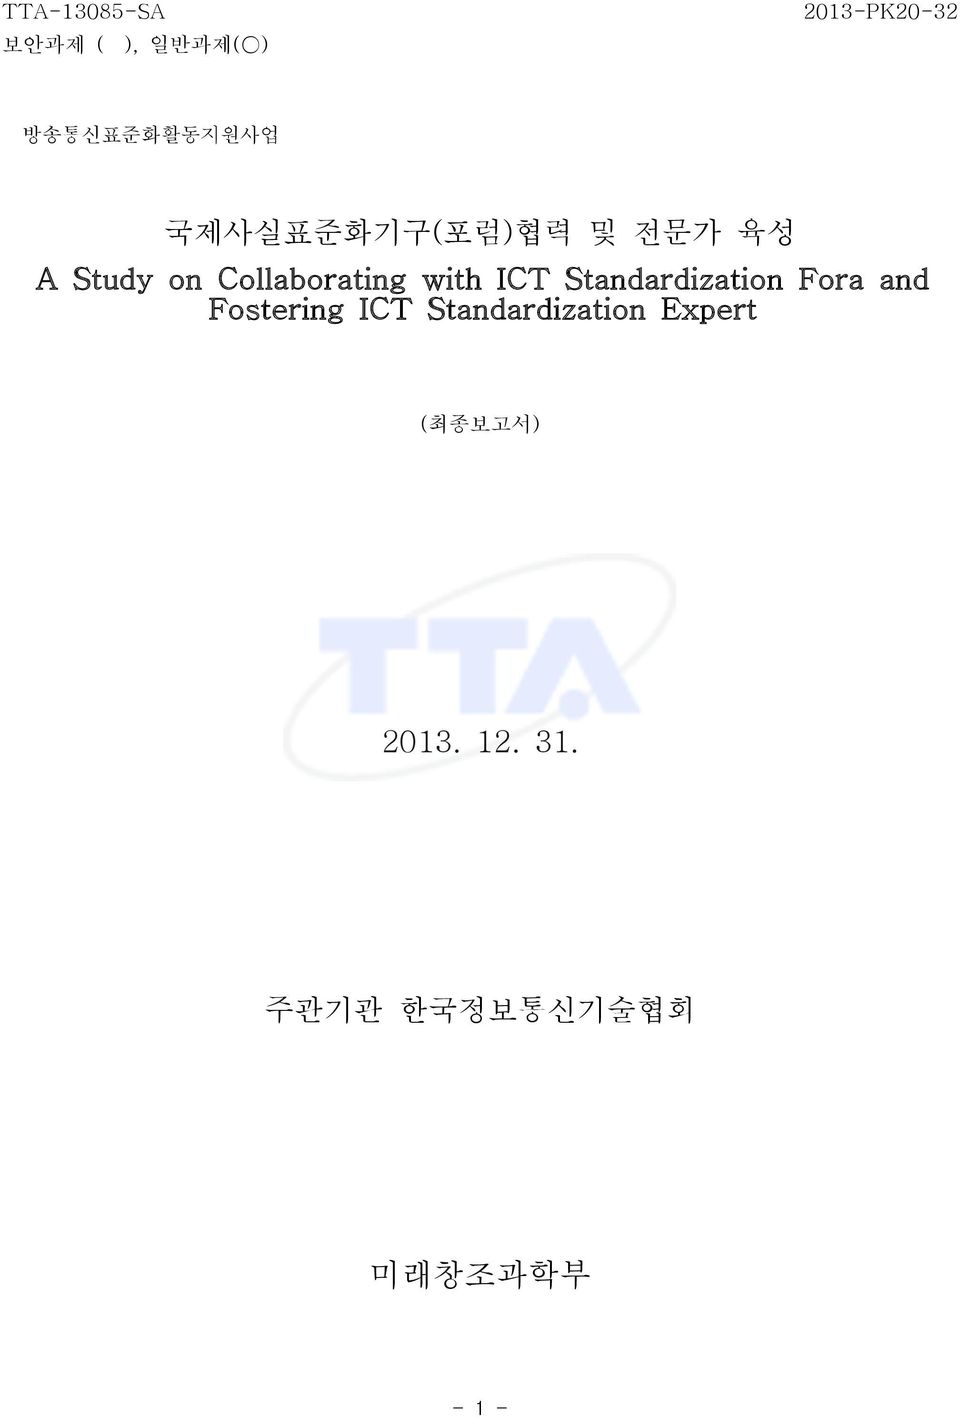 ICT Standardization Fora and Fostering ICT